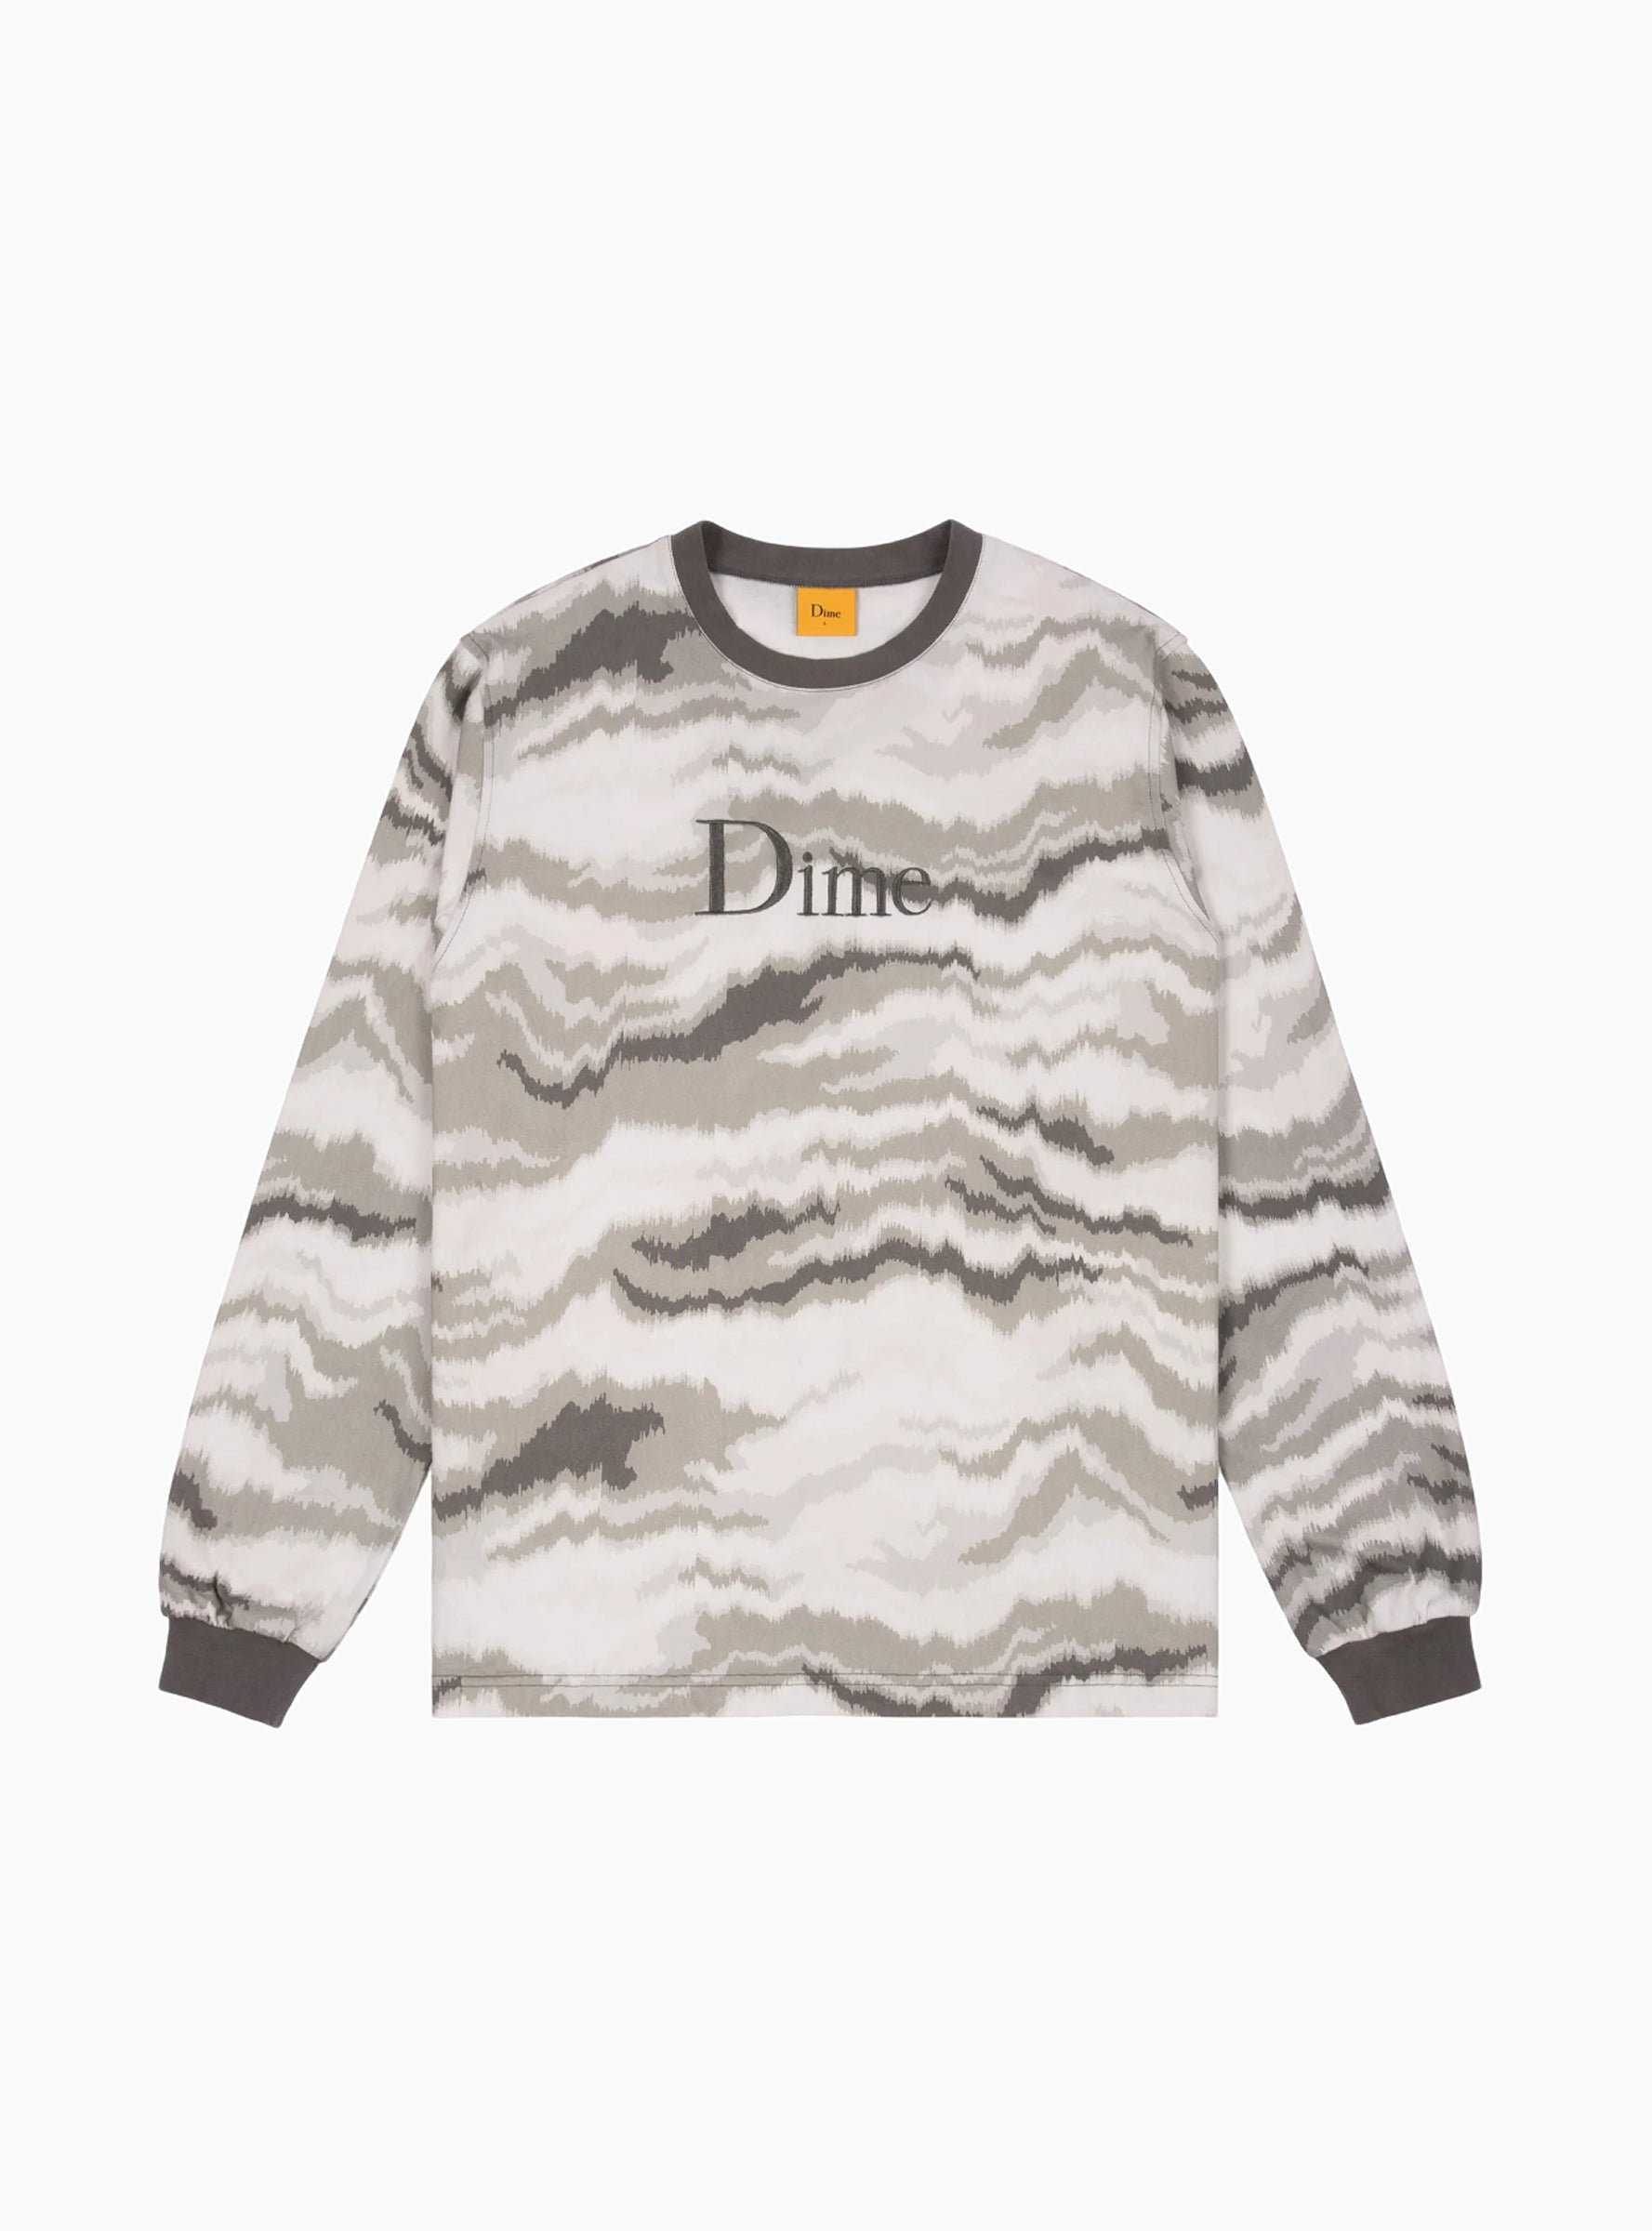  Dime Frequency Long Sleeve T-shirt Grey - Size: XL